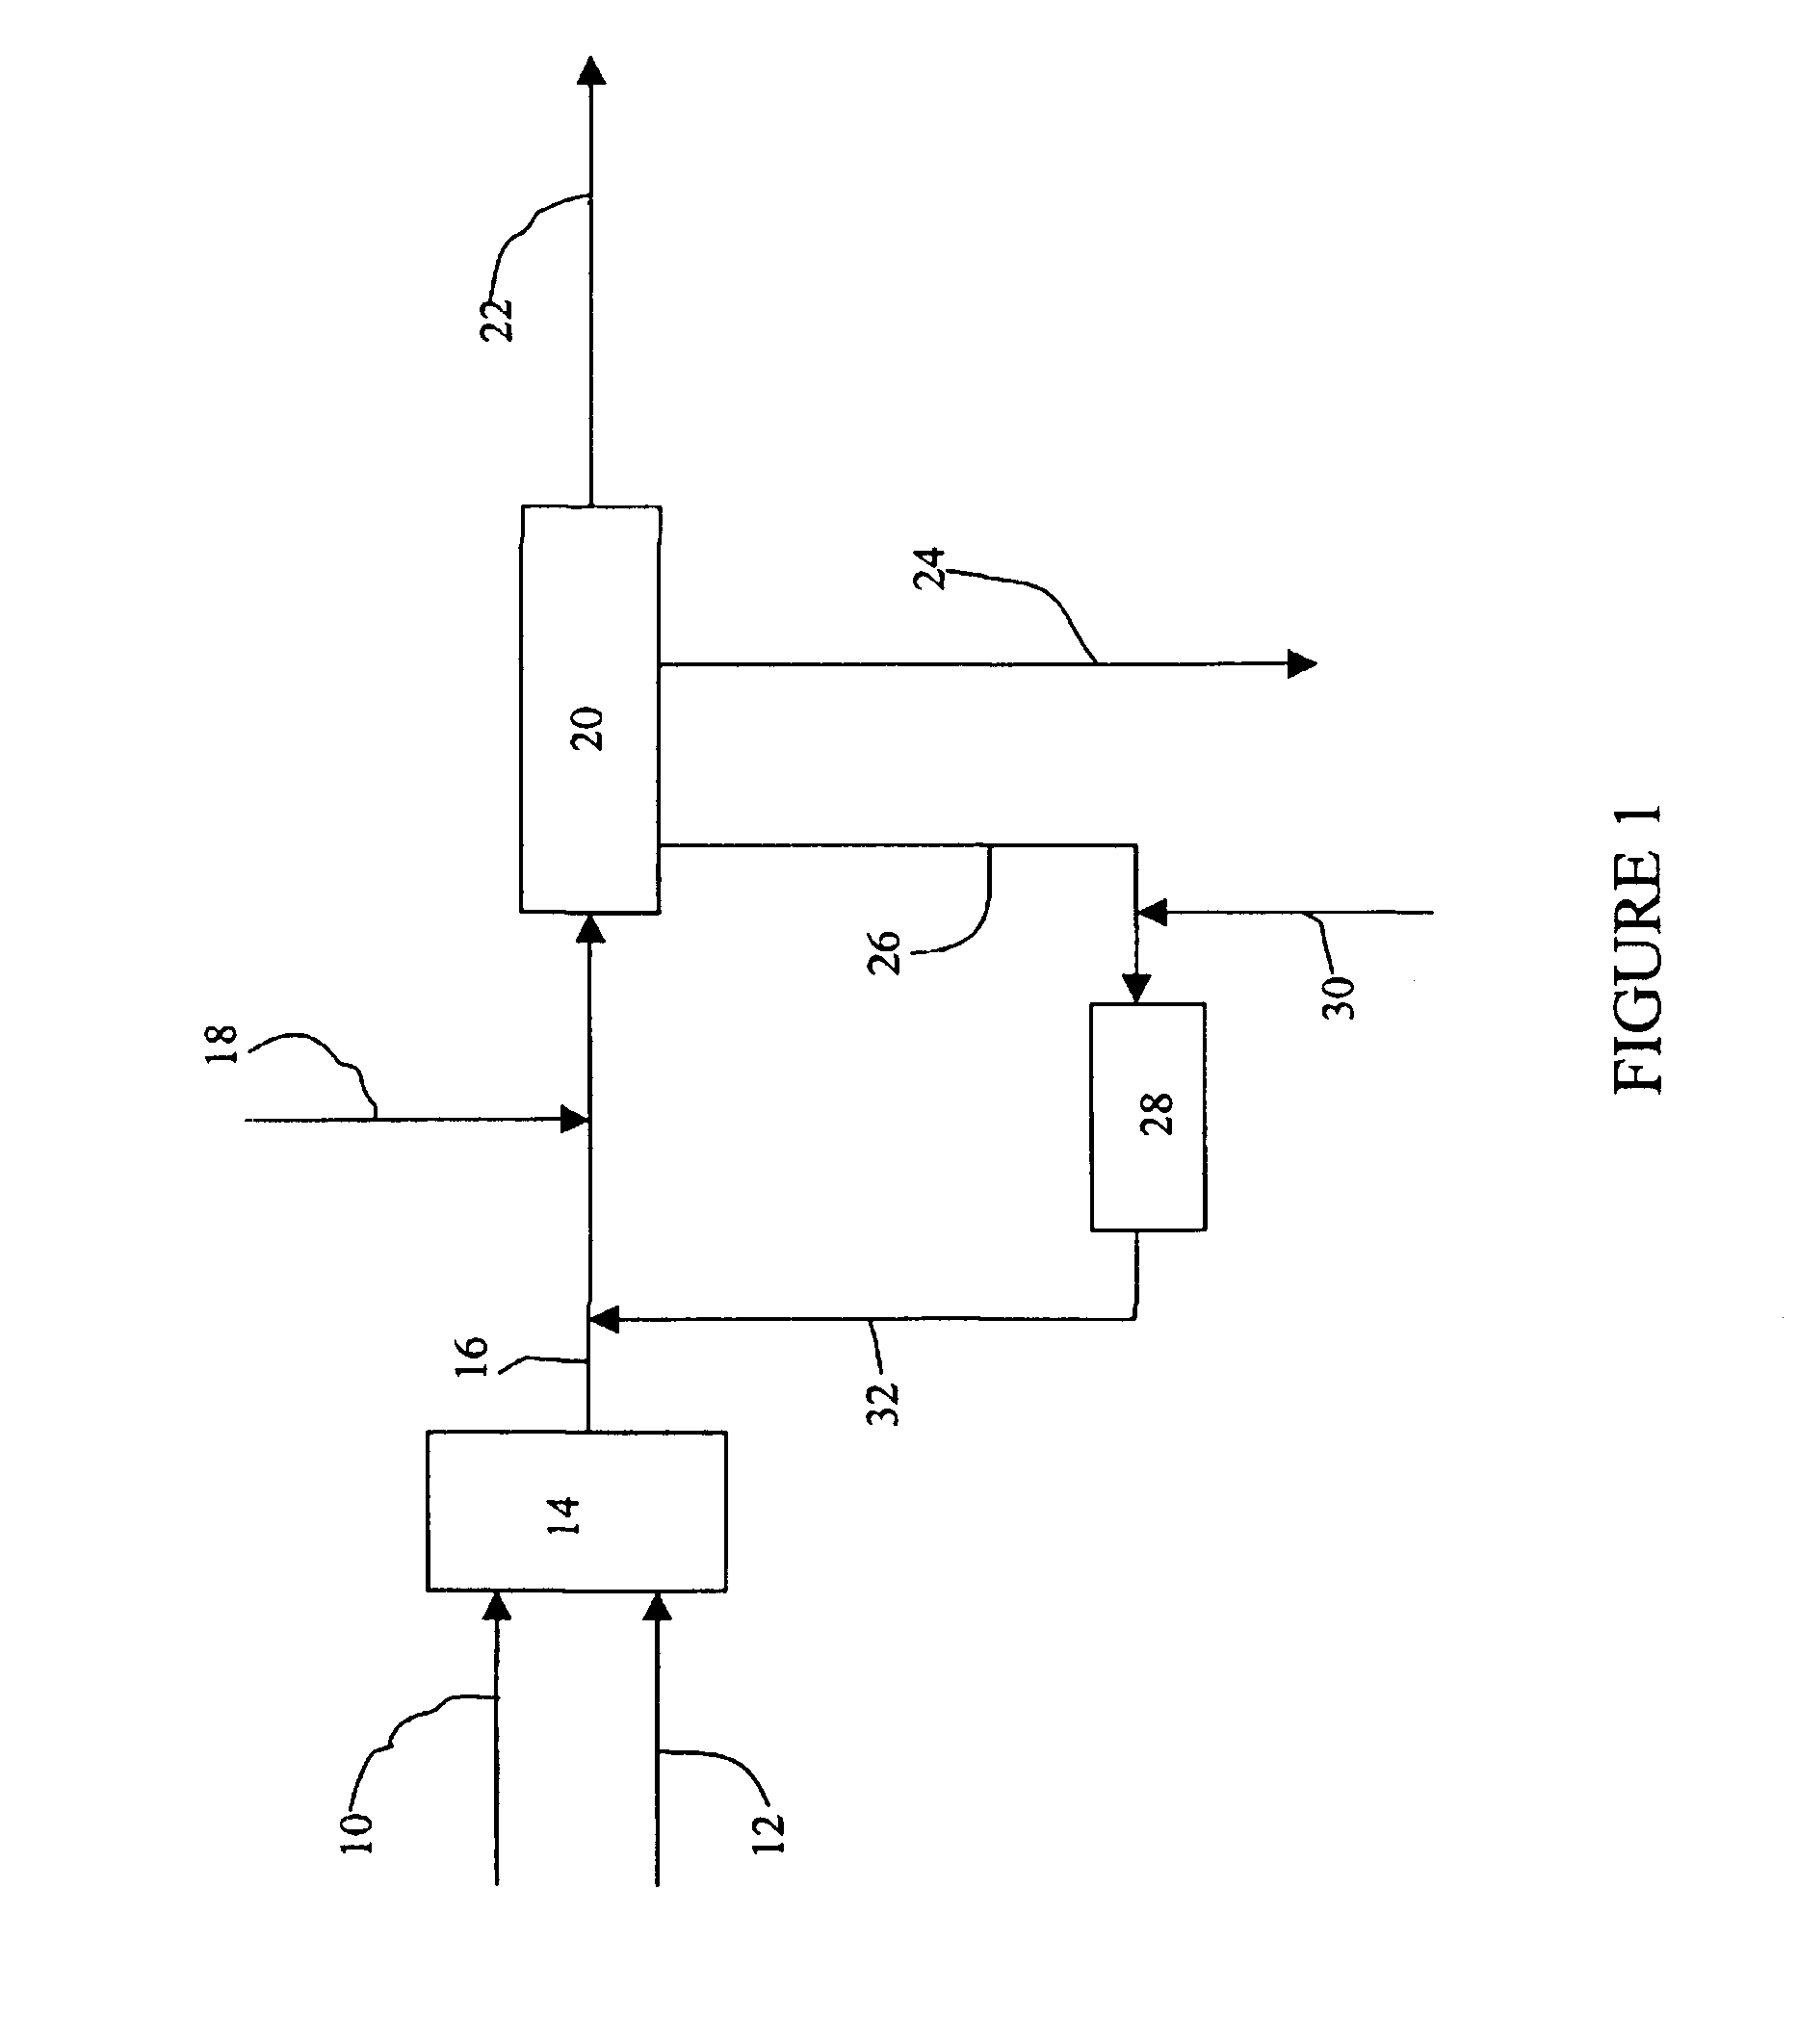 Method and system for purifying cumene hydroperoxide cleavage products